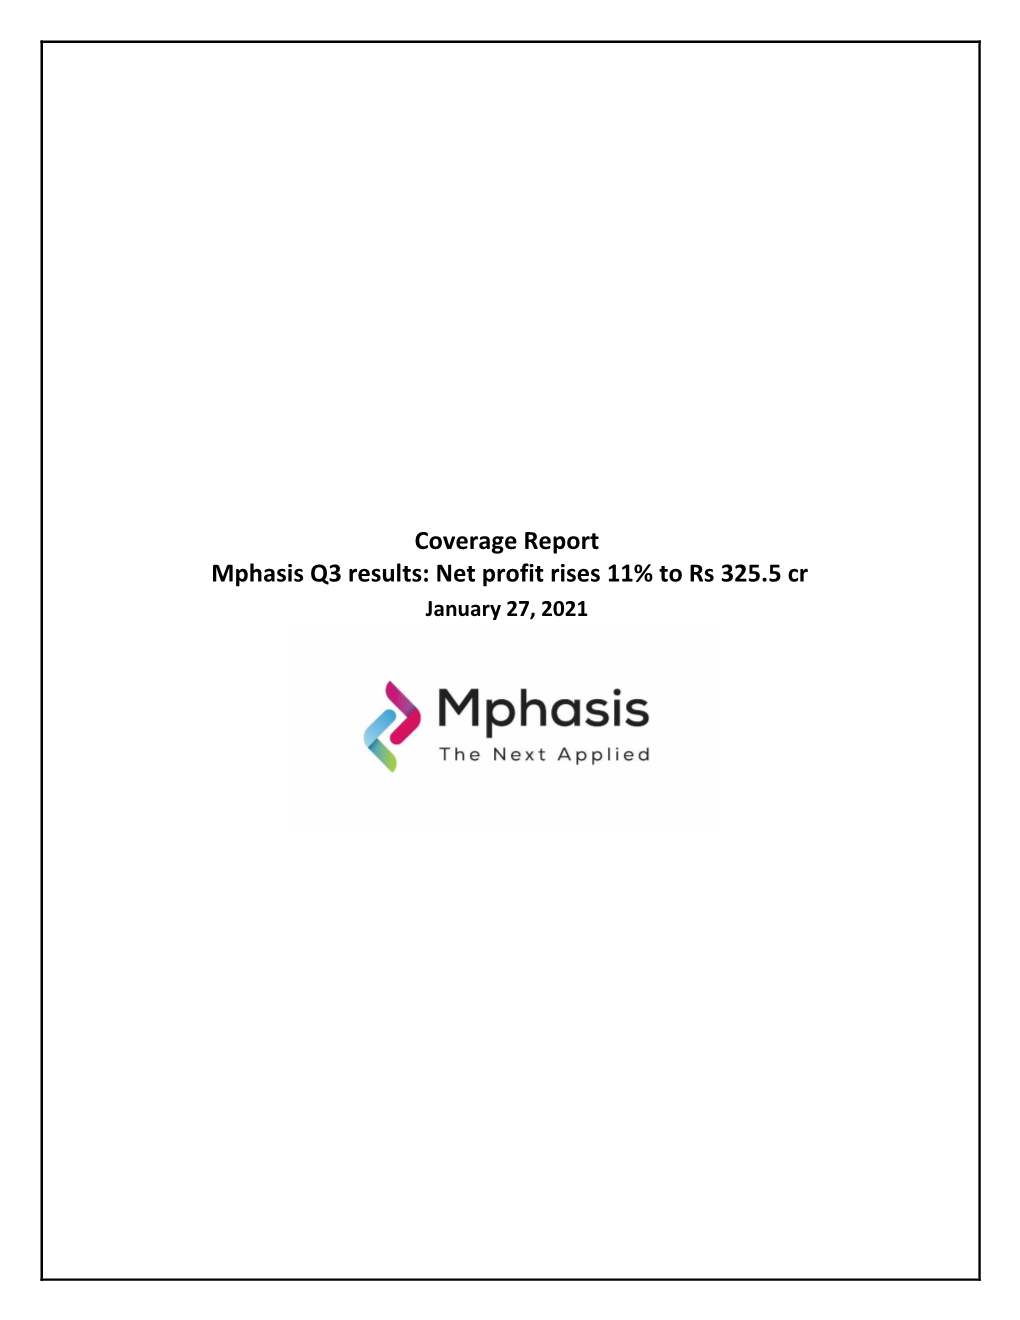 Coverage Report Mphasis Q3 Results: Net Profit Rises 11% to Rs 325.5 Cr January 27, 2021